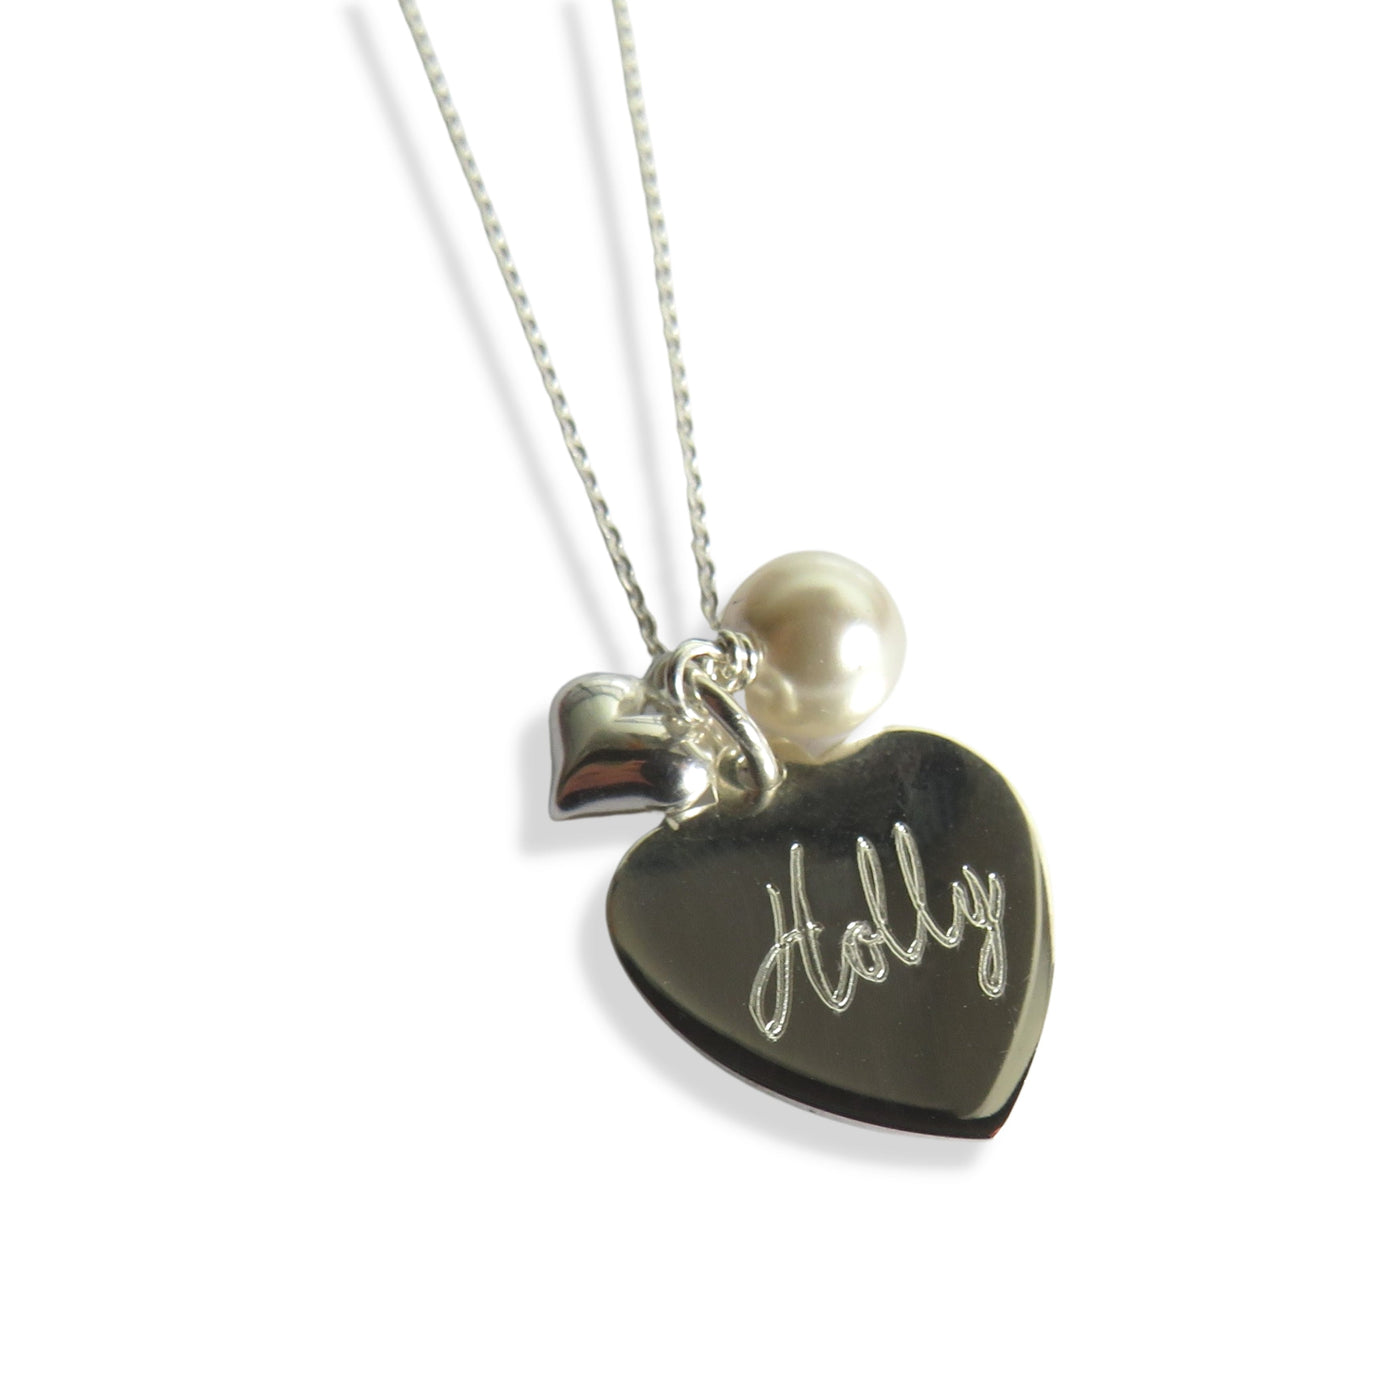 Personalised Silver Heart, Pearl & Mini Heart Charm Necklace